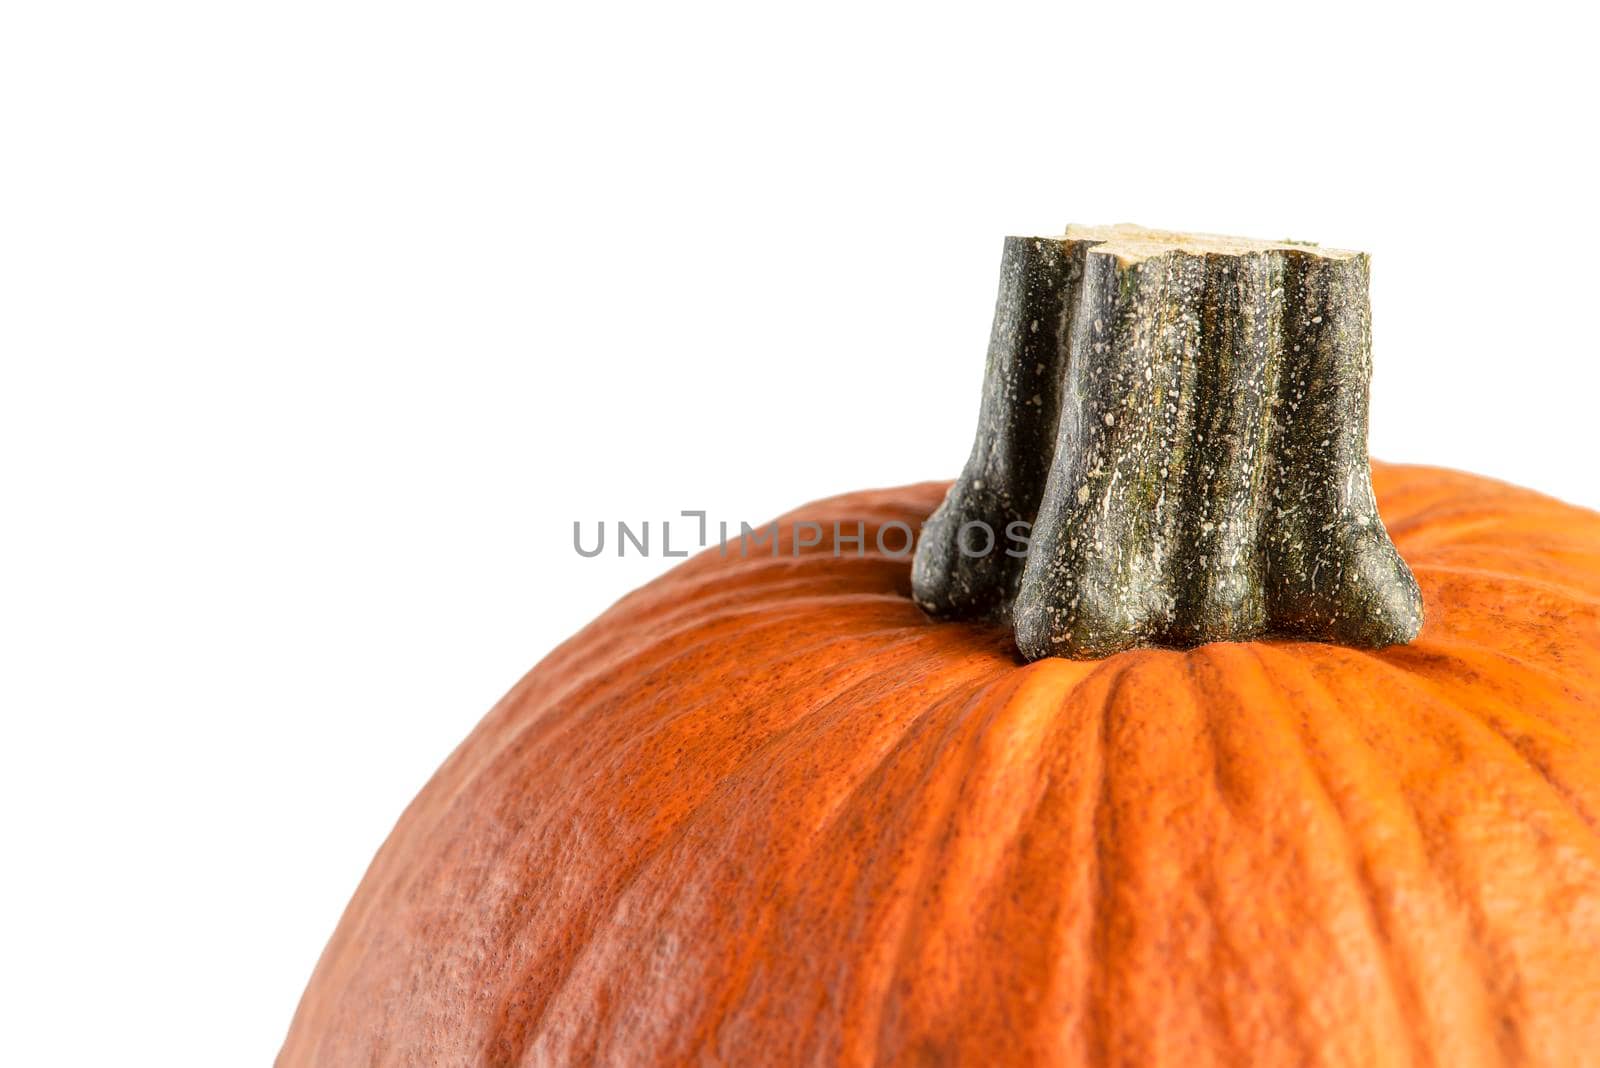 Pumpkin on a white background. Isolated halloween pumpkin isolate on white to insert into your project or design. One orange pumpkin casts a shadow.